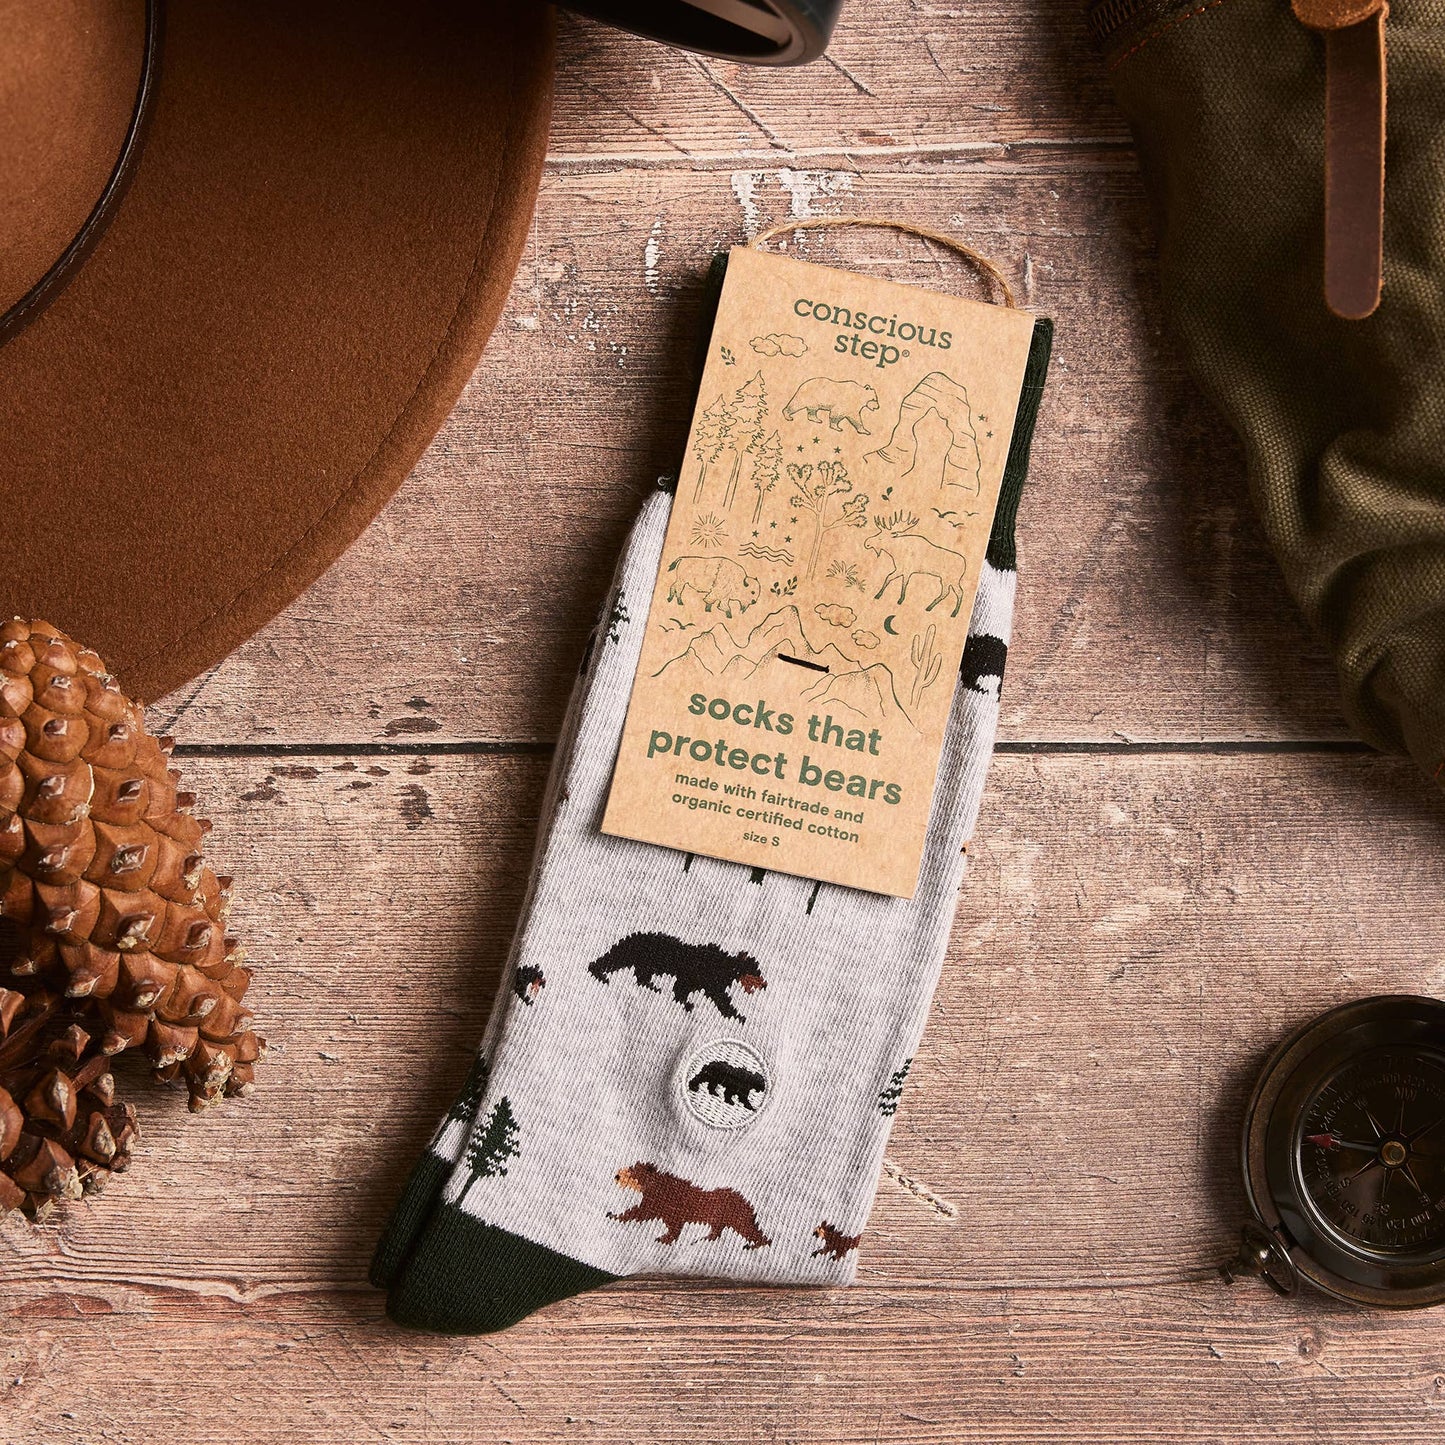 Conscious Step - Socks that Protect Bears  Conscious Step   -better made easy-eco-friendly-sustainable-gifting